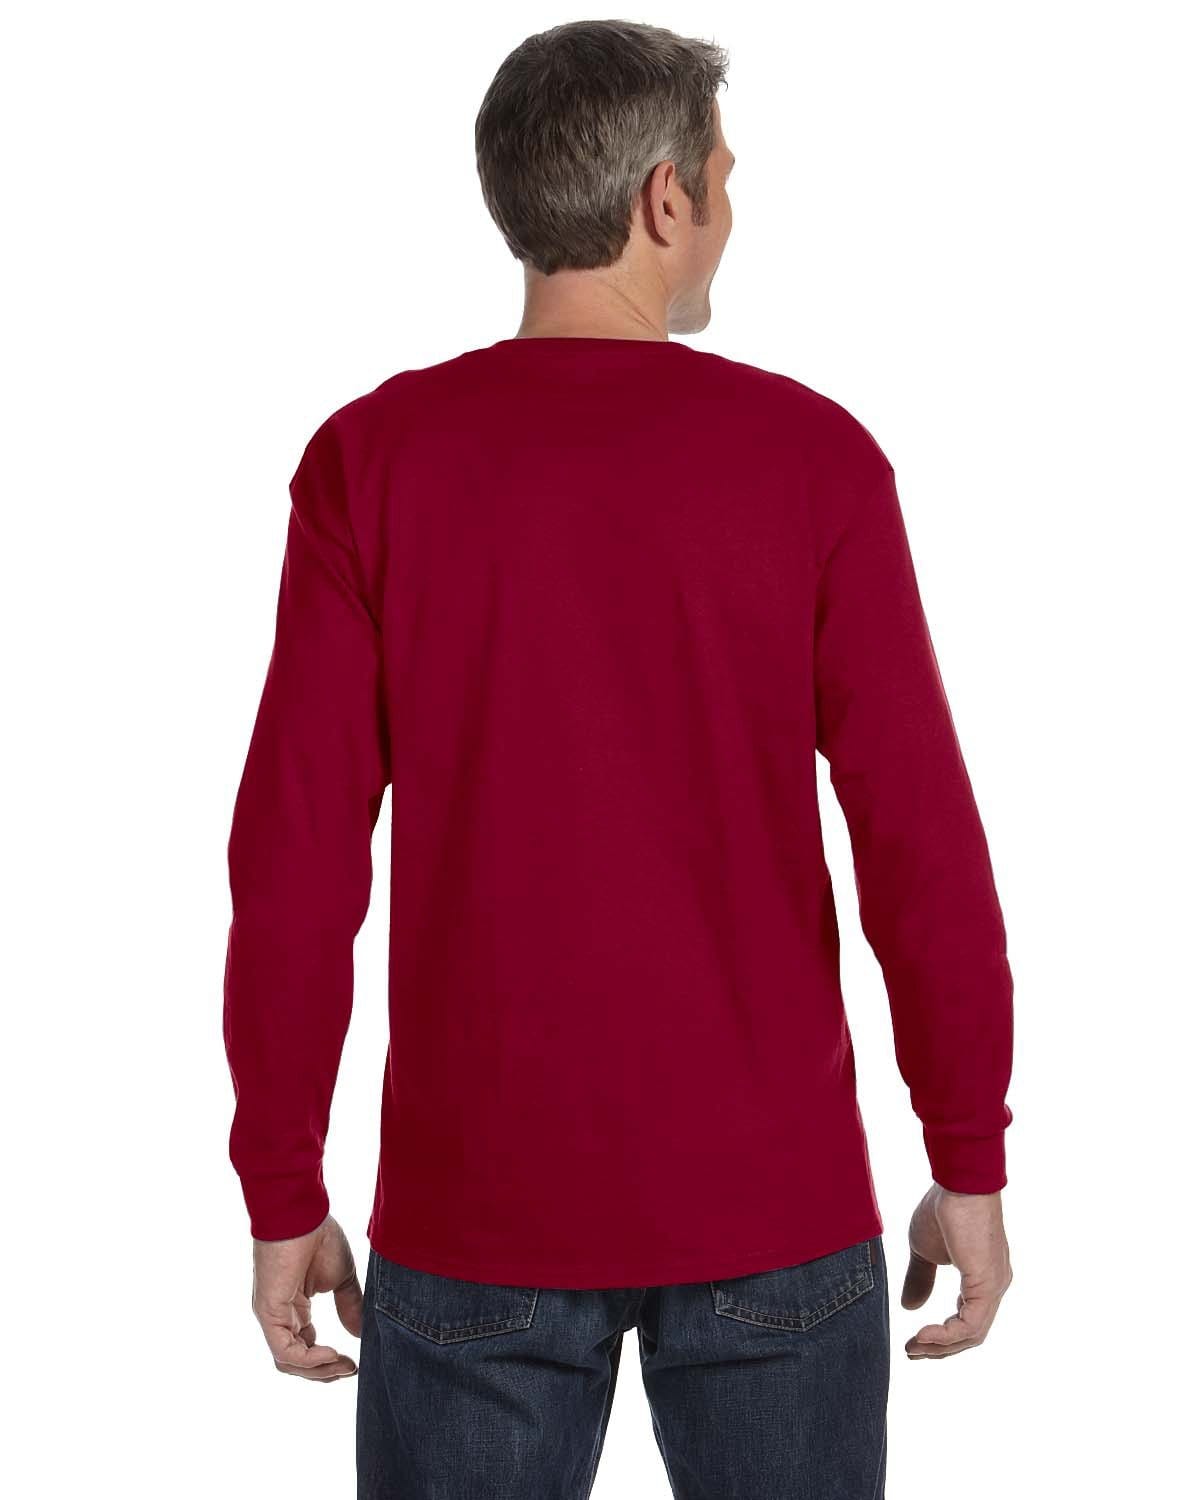 Jerzees Men's Adult Long Sleeve Tee, Athletic Heather, Small